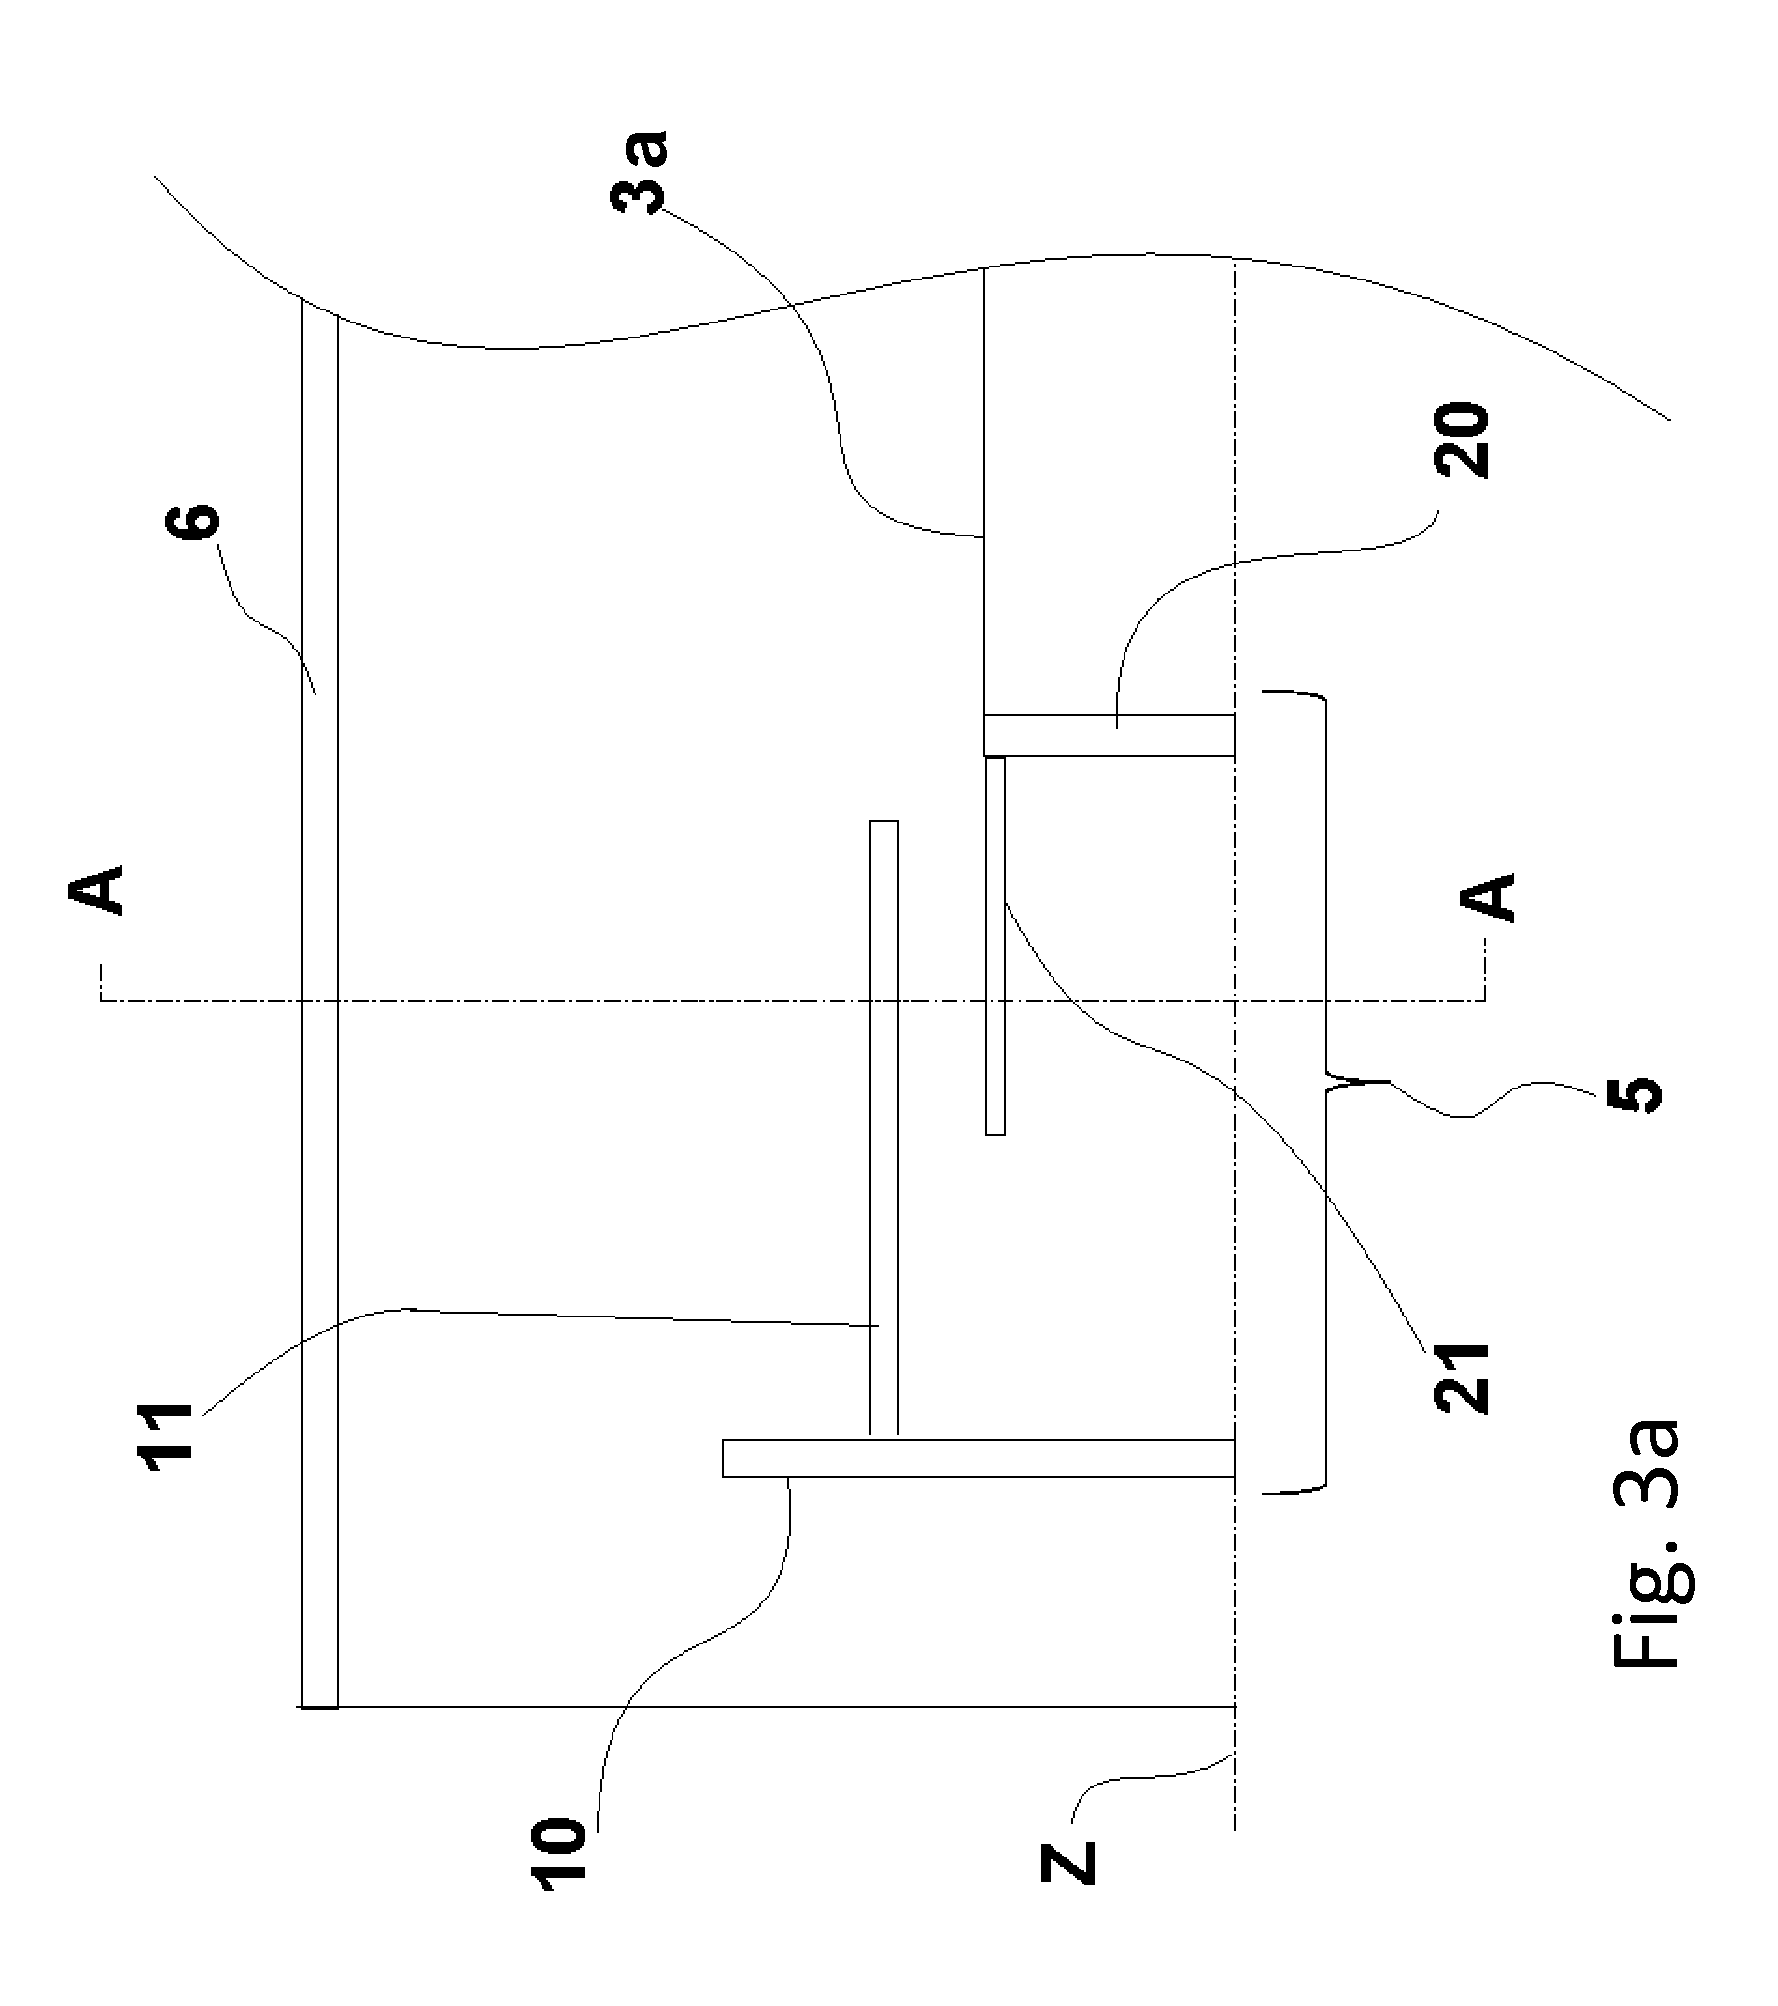 Variable Rotating Capacitor for Synchrocyclotron